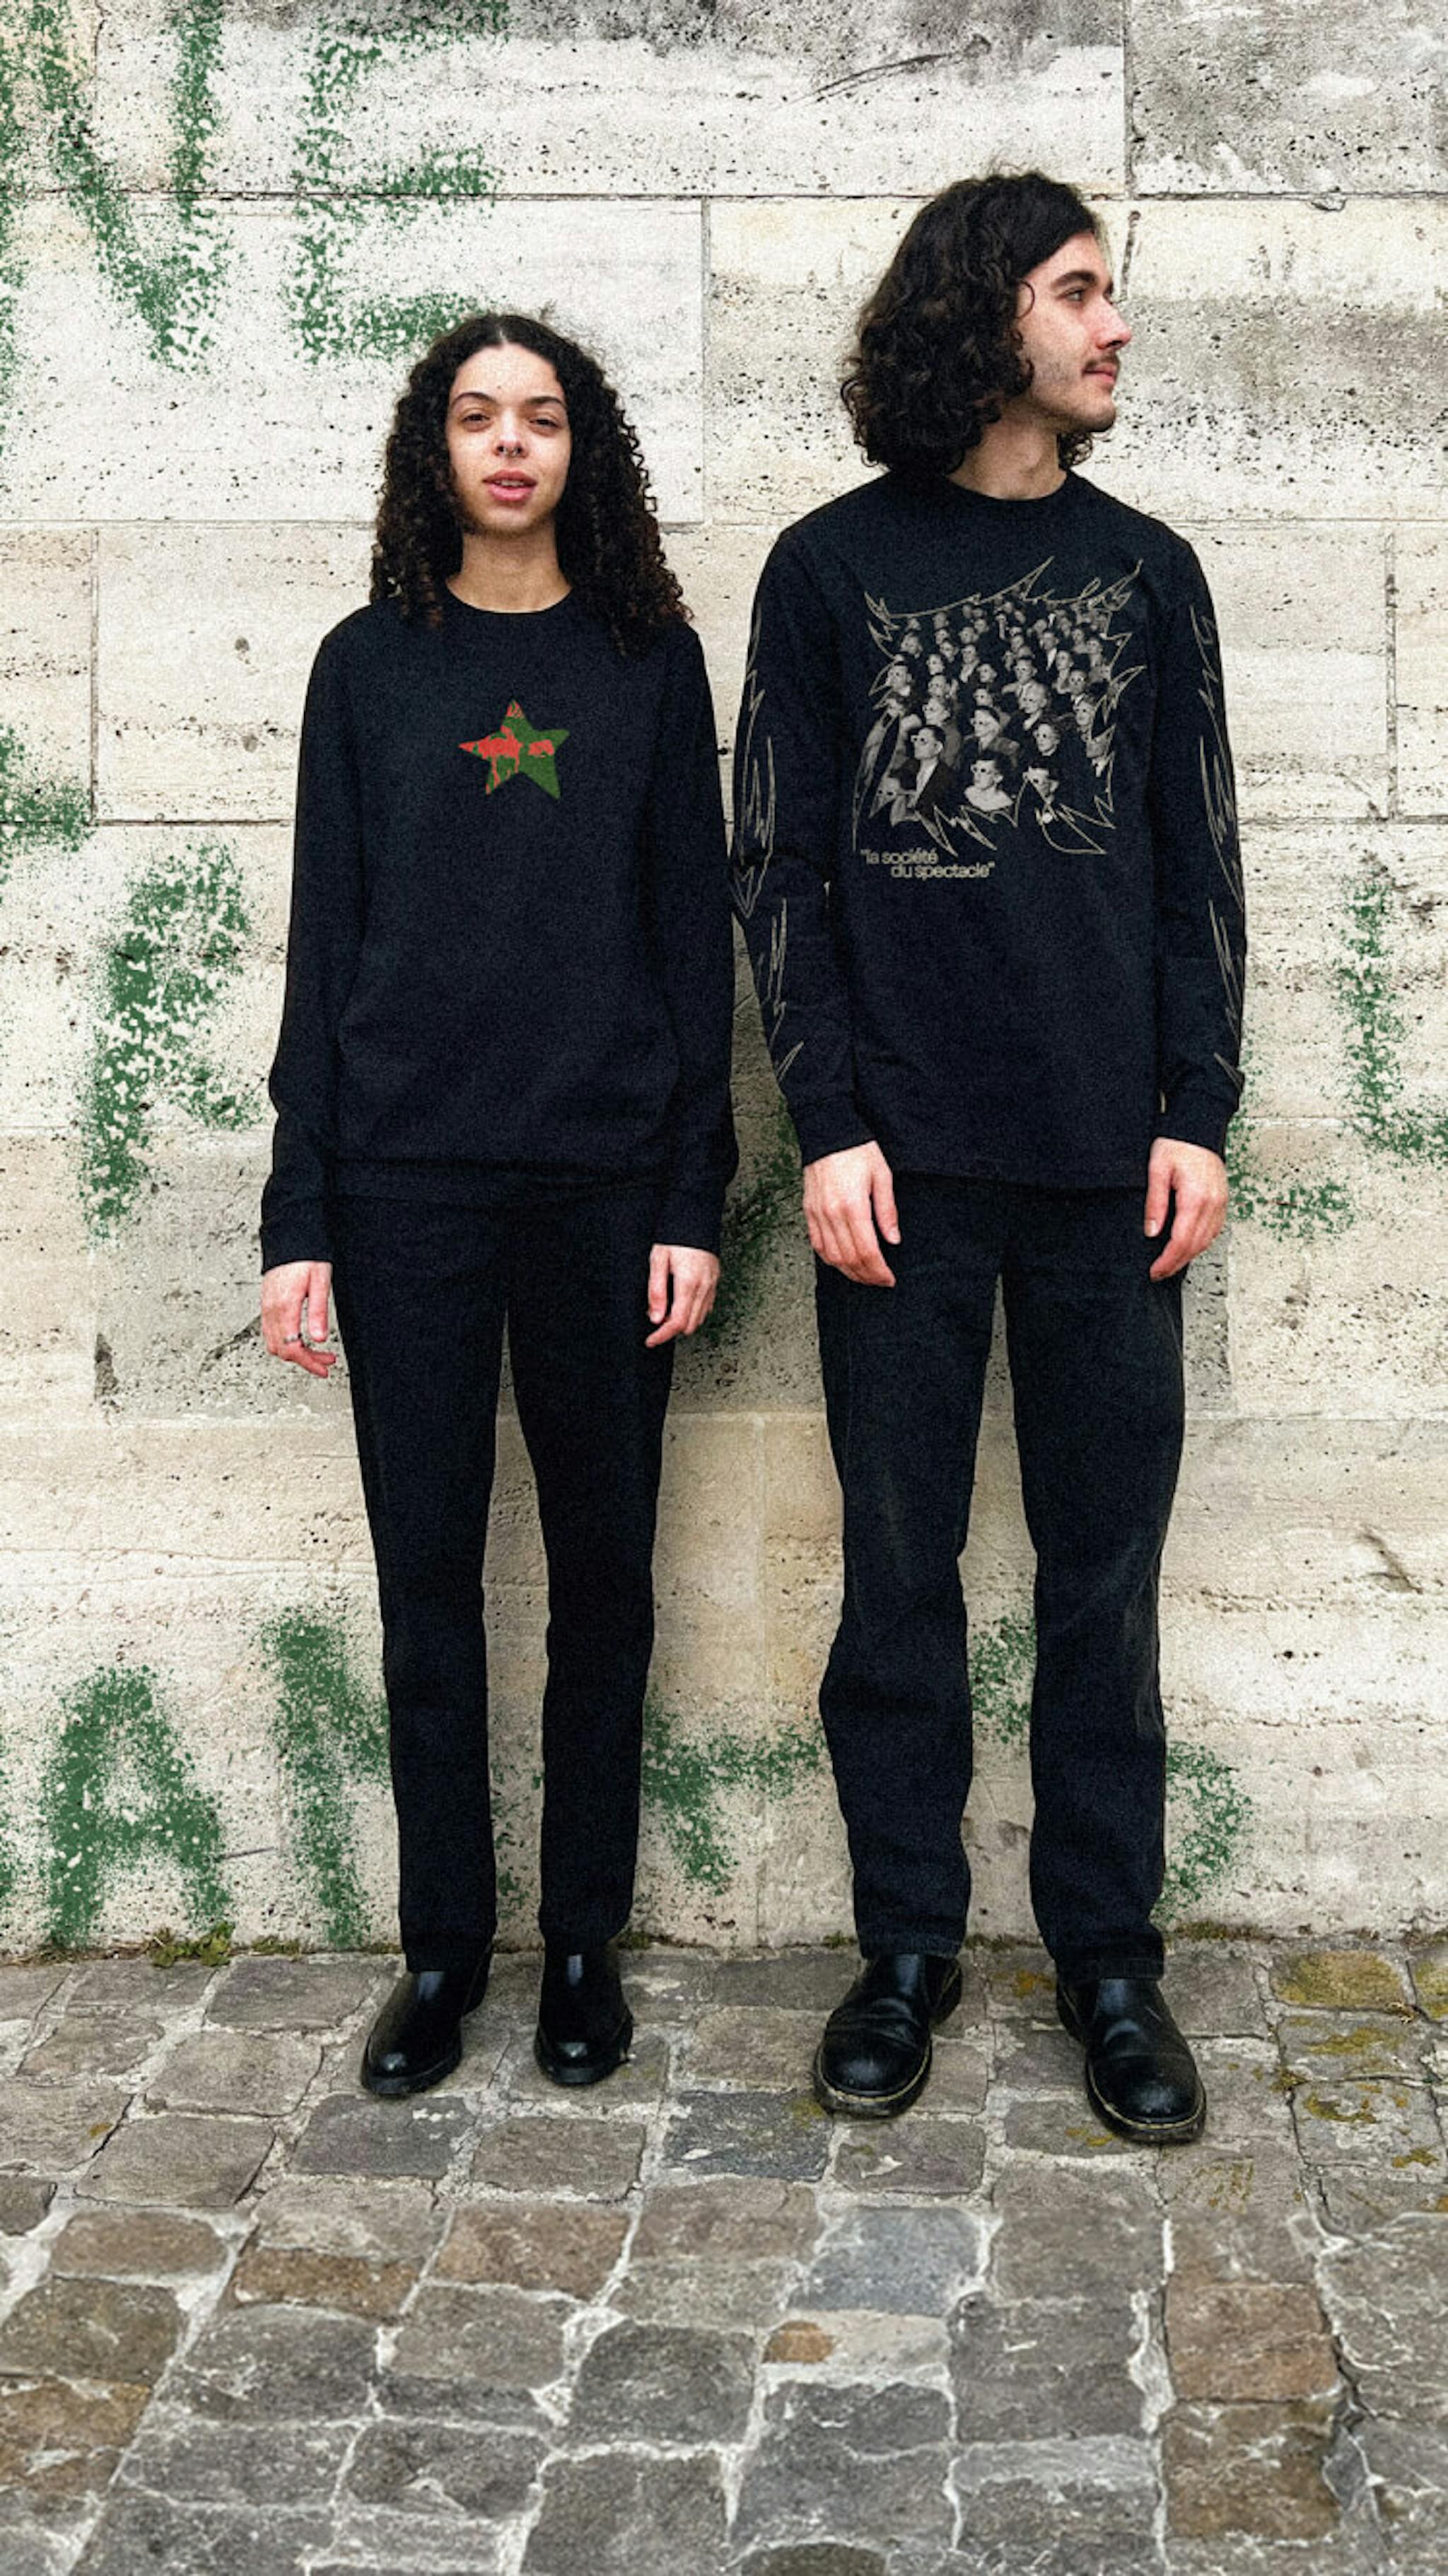 Two individuals in black attire against a graffitied wall.